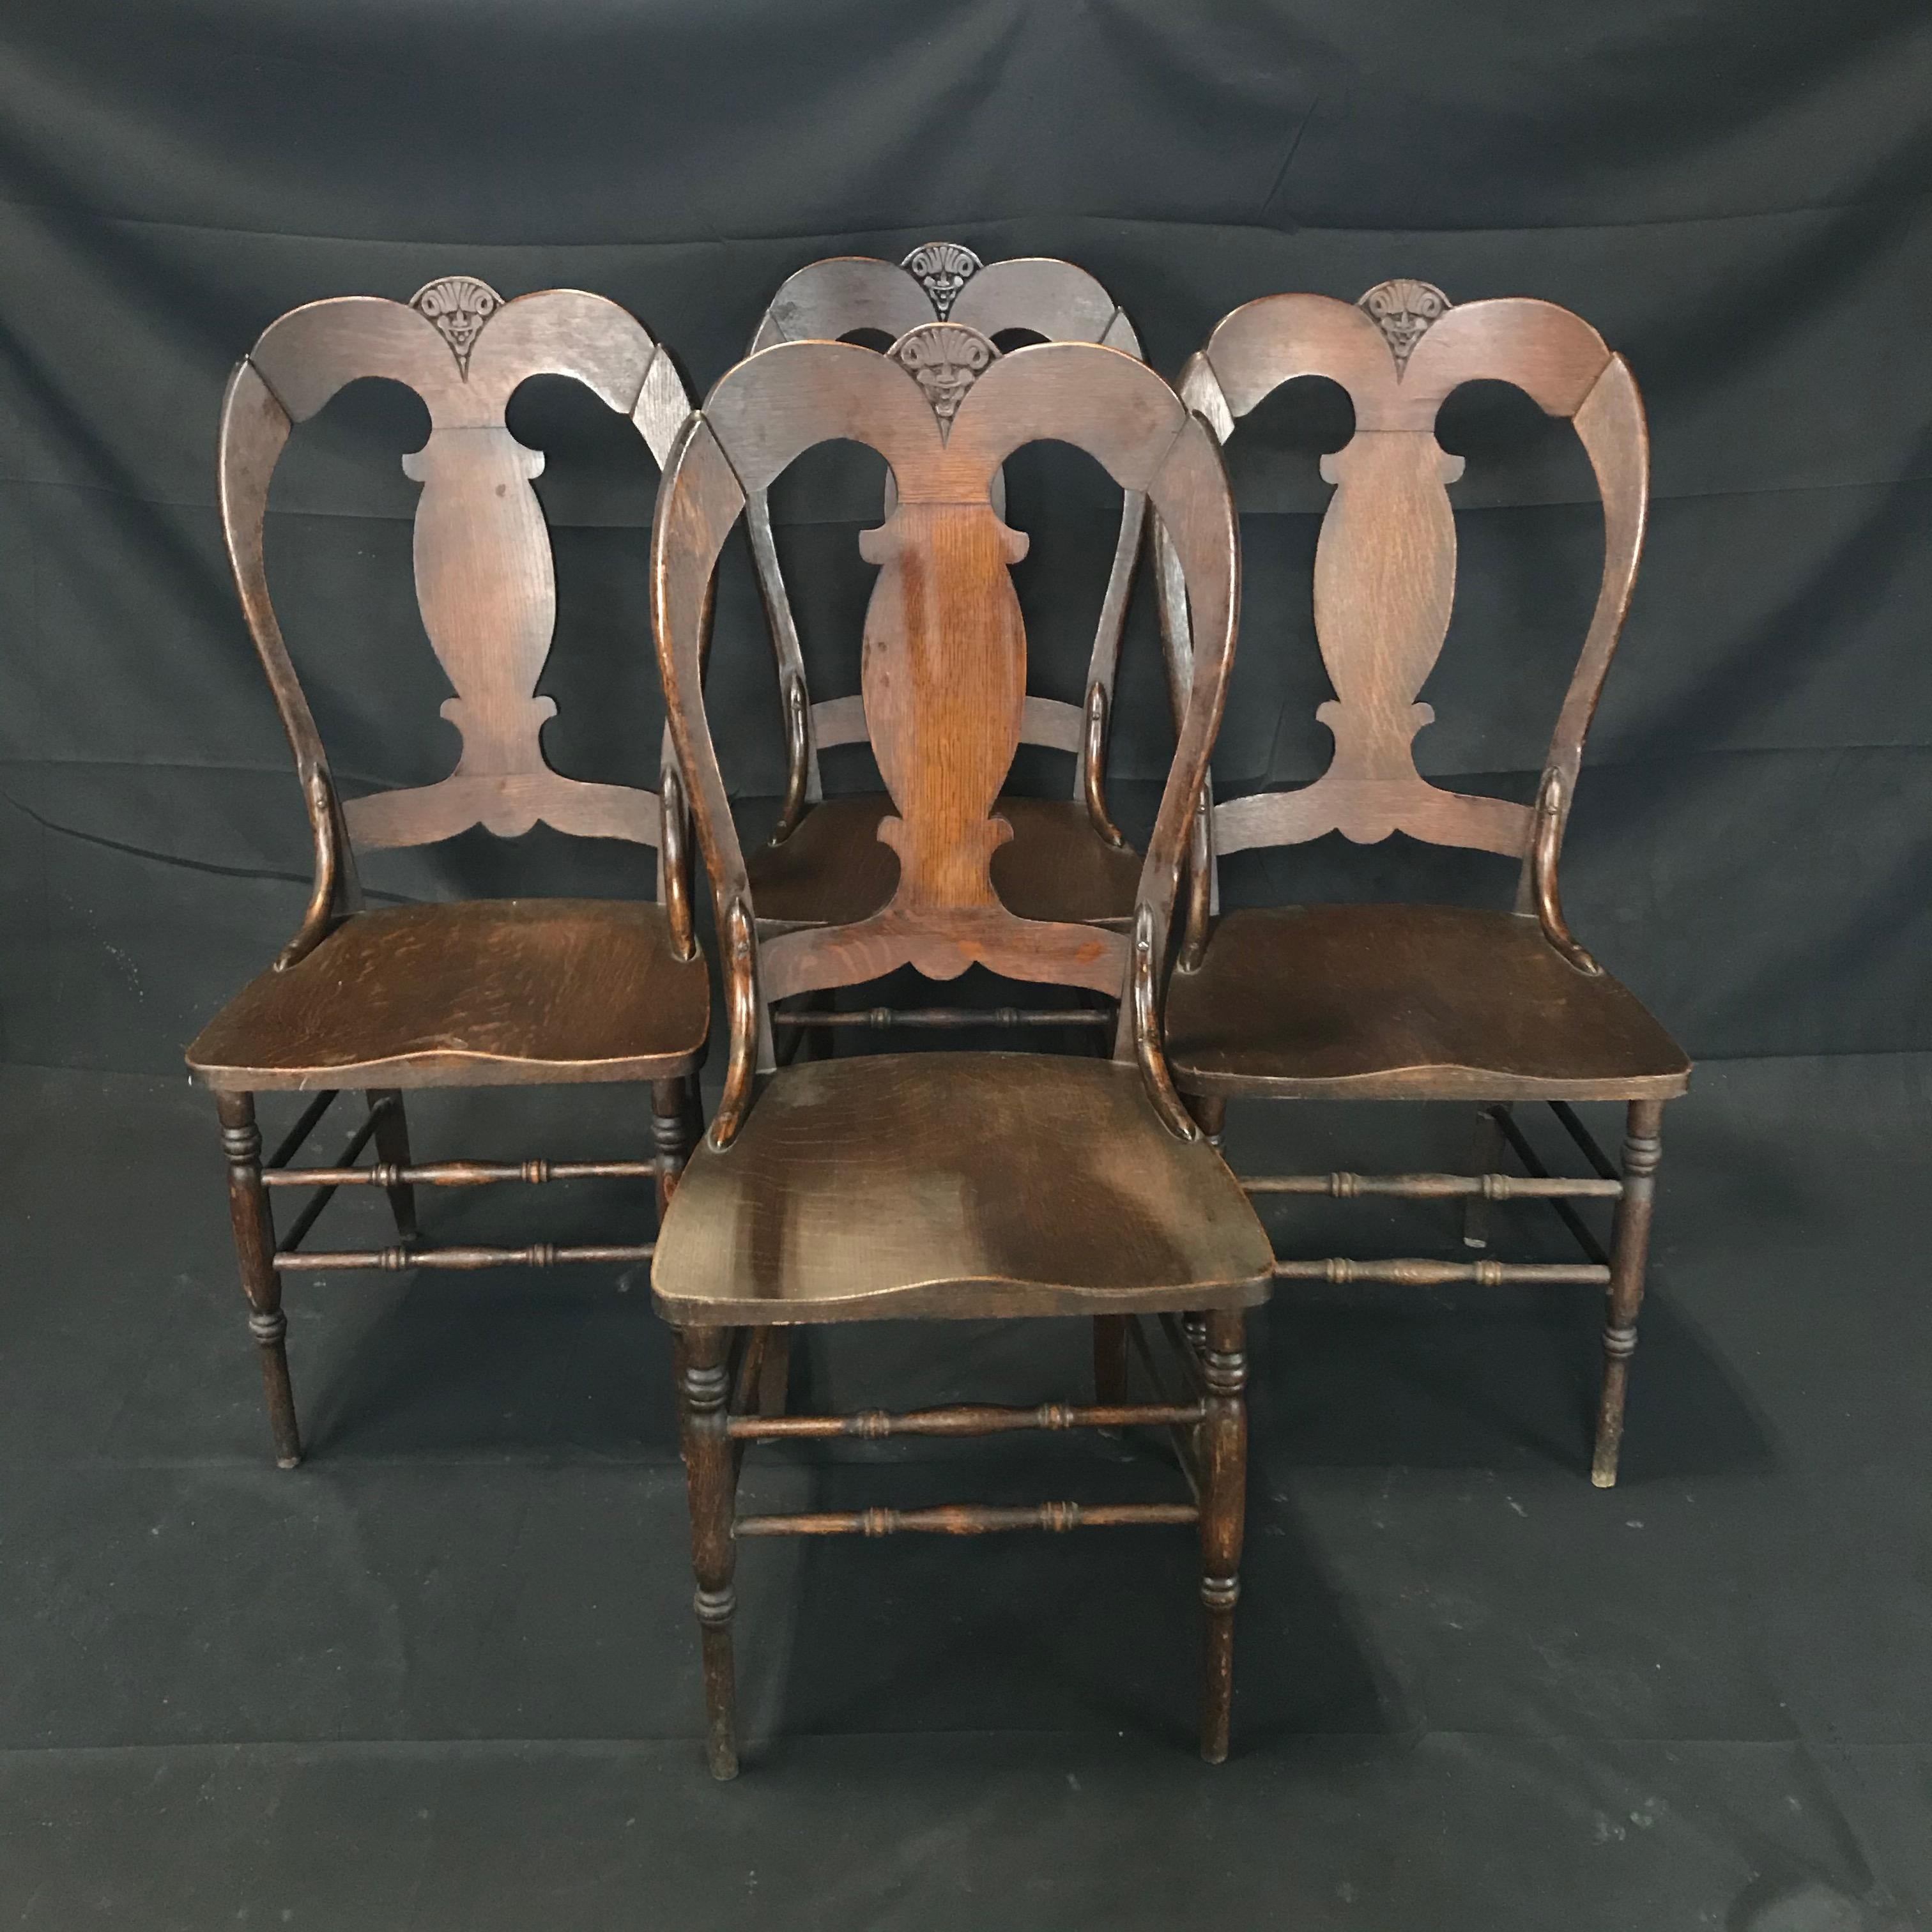 A whimsically carved late 19th century set of four Renaissance Arts and Crafts style figural oak dining chairs featuring a carved face, solid wood construction, beautiful wood grain, and great style and form. New updated contemporary seat cushions